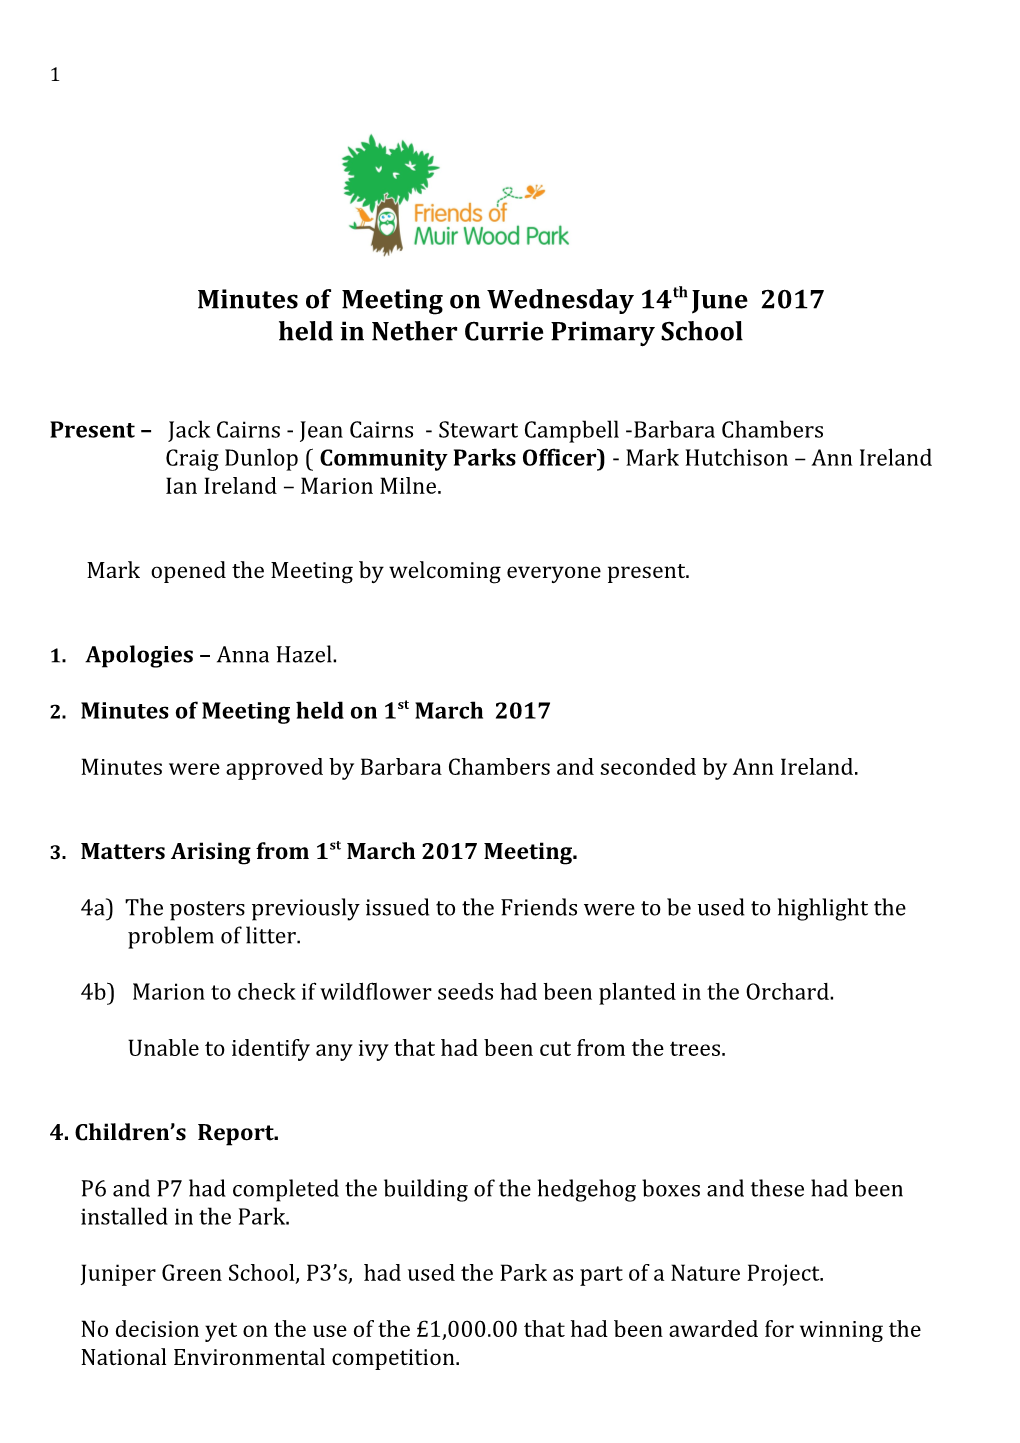 Minutes of Meetingon Wednesday 14Th June 2017